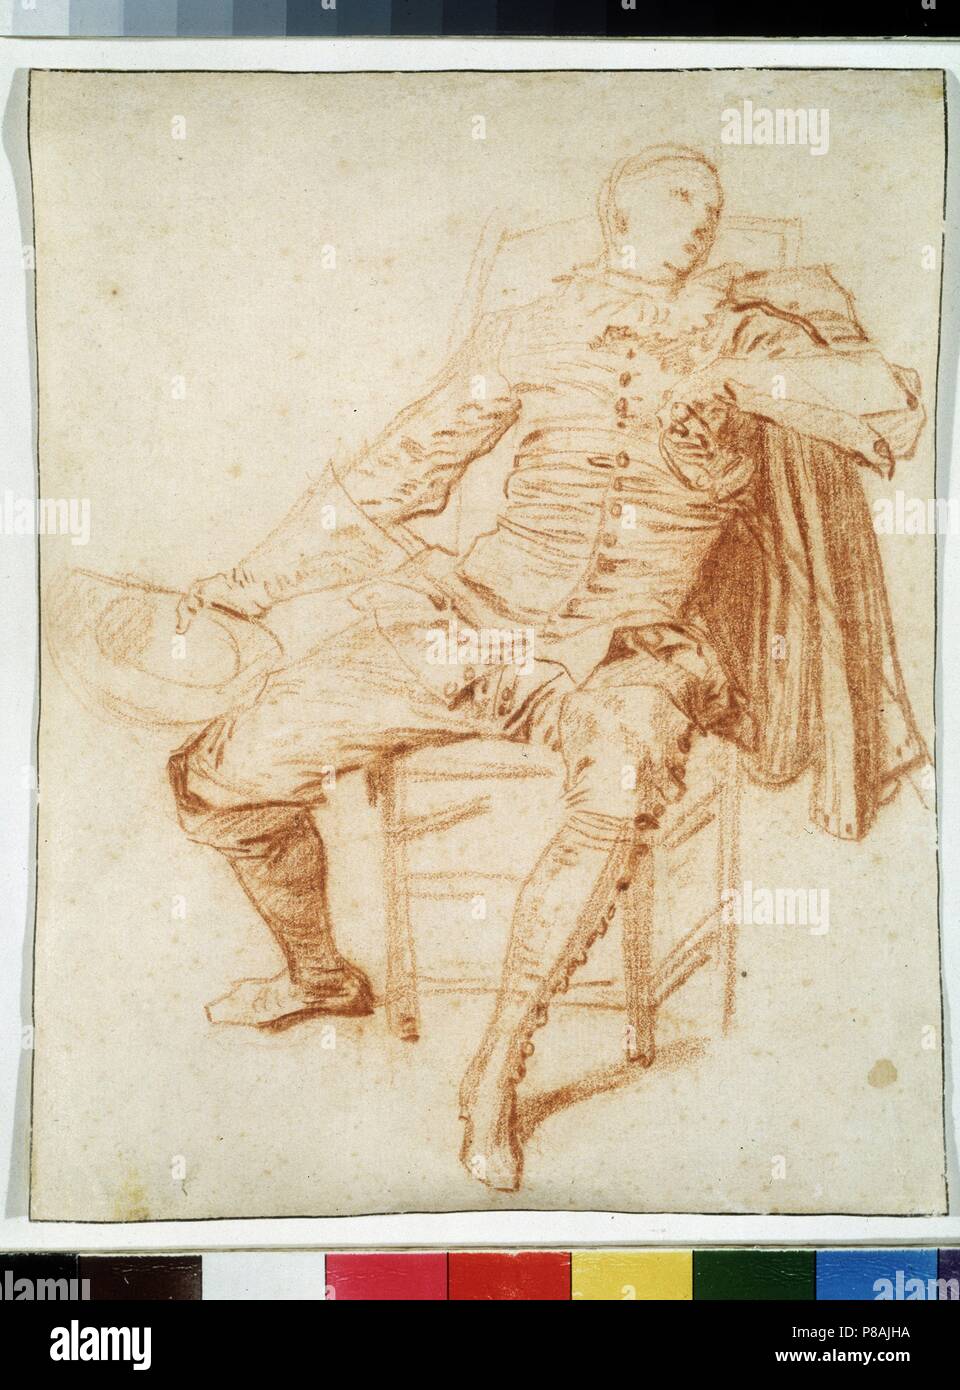 Actor of the Comédie italienne (Crispin). Museum: State A. Pushkin Museum of Fine Arts, Moscow. Stock Photo